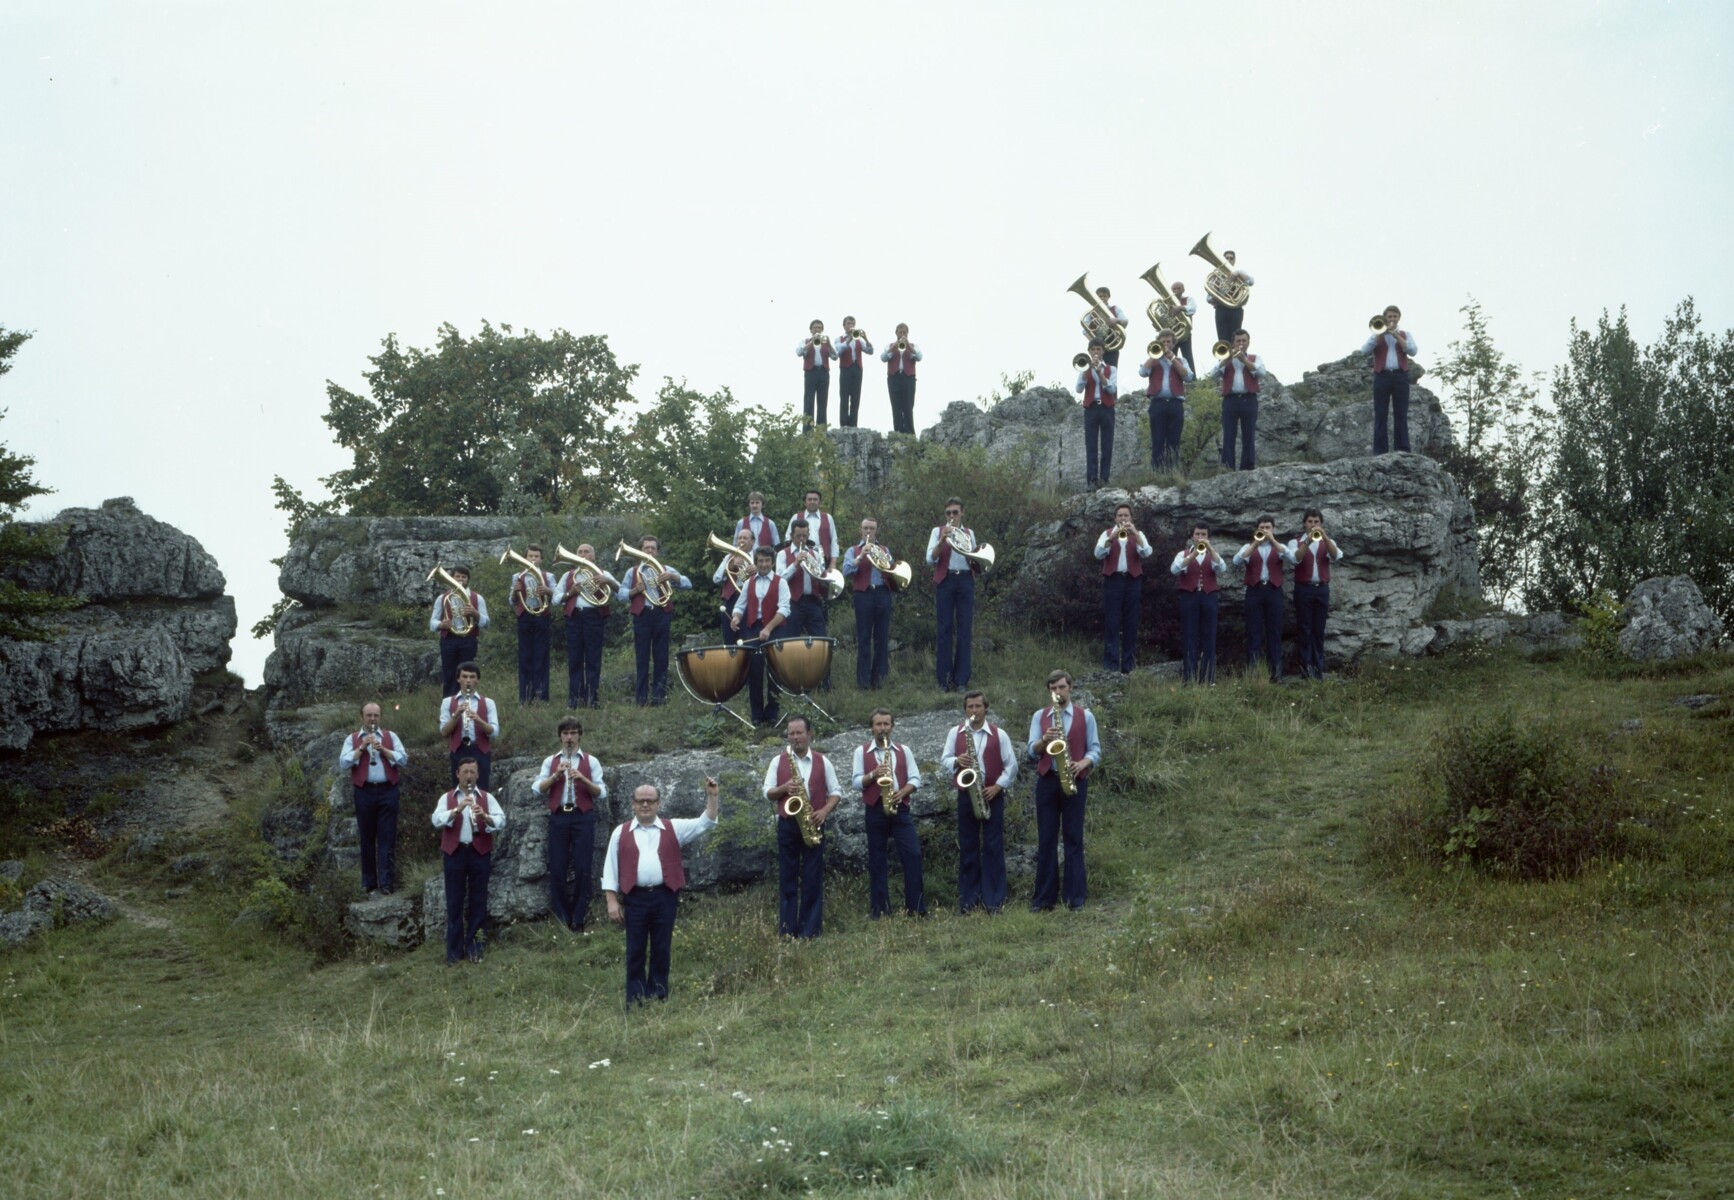 The musicians of the KSB factory brass ensemble on a rock formation just off the Nuremberg-Bayreuth motorway in 1979.